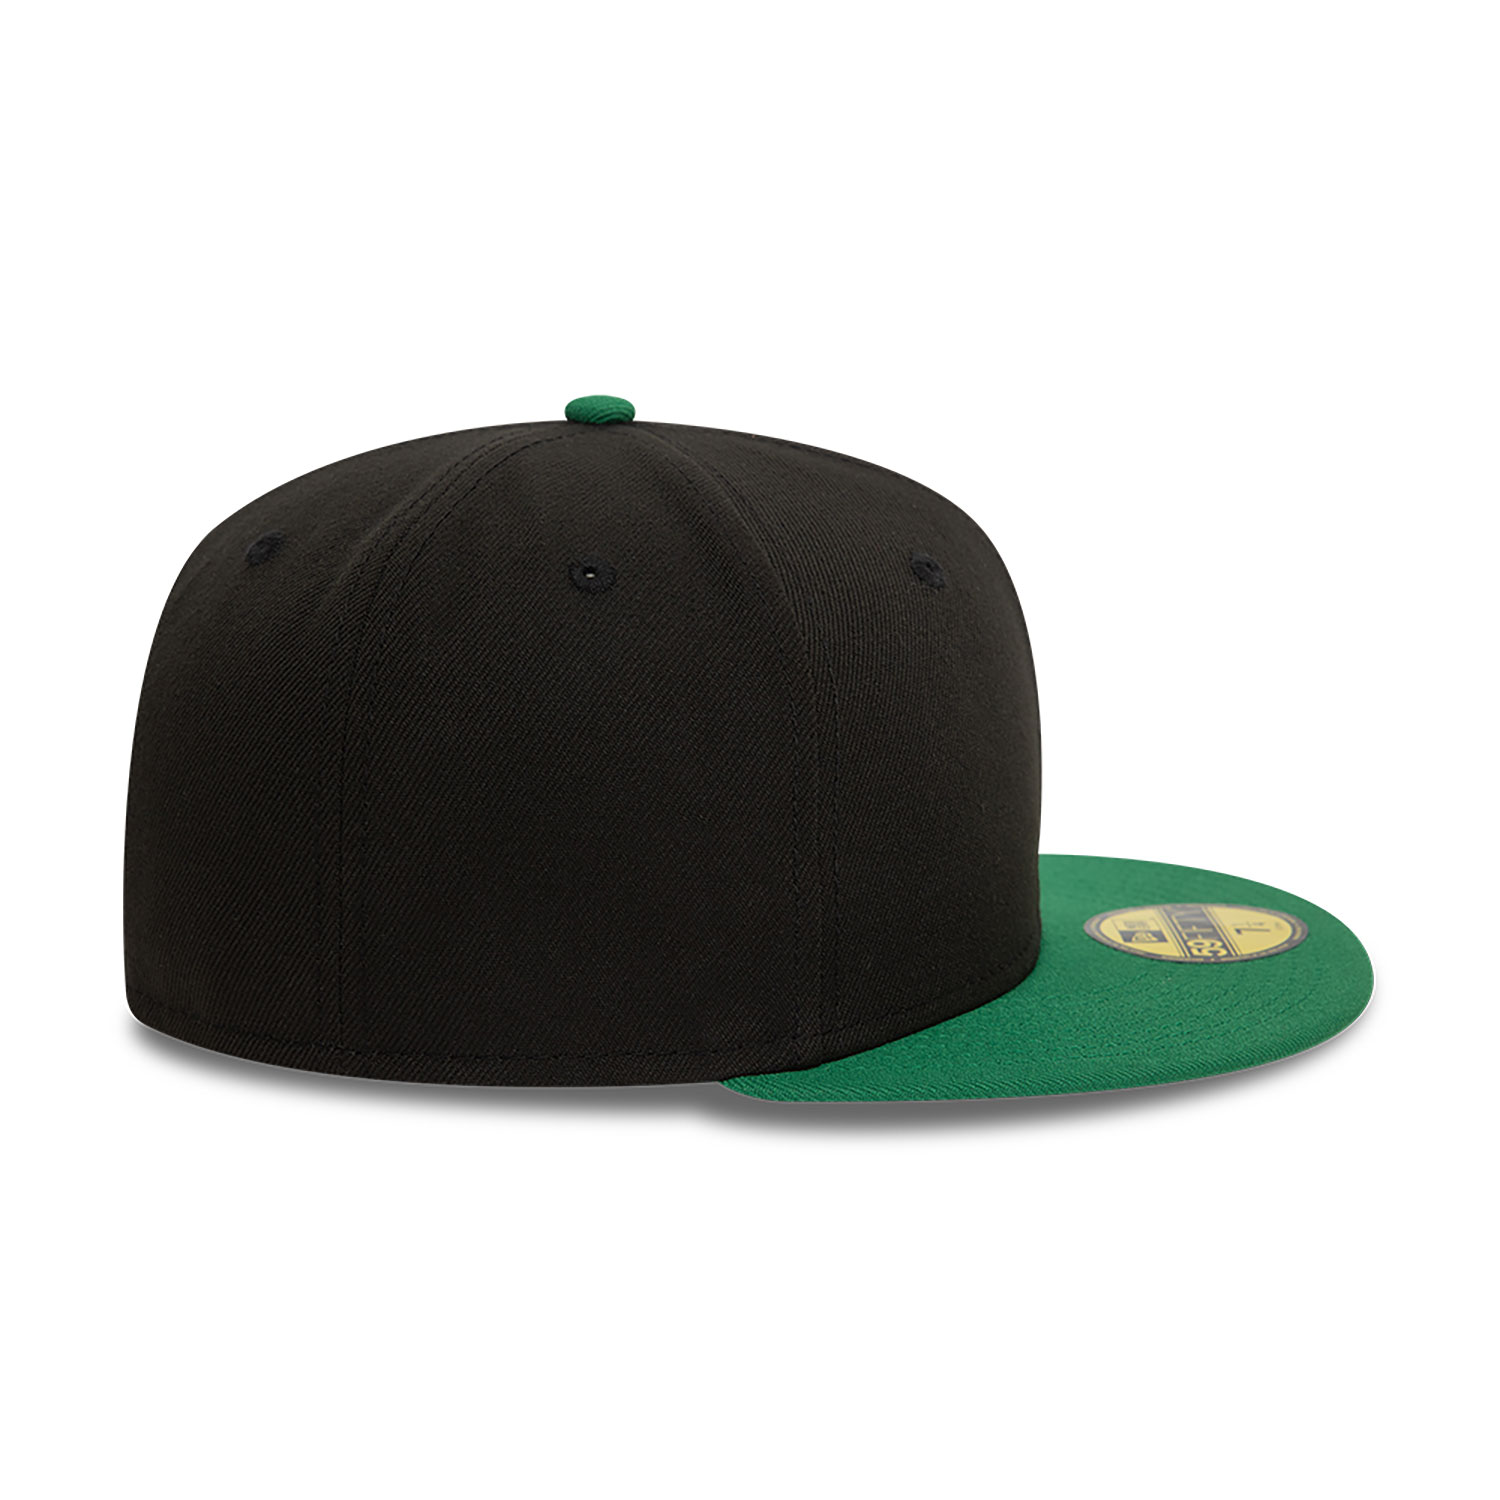 New Era Contrast Crown Black and Green 59FIFTY Fitted Cap